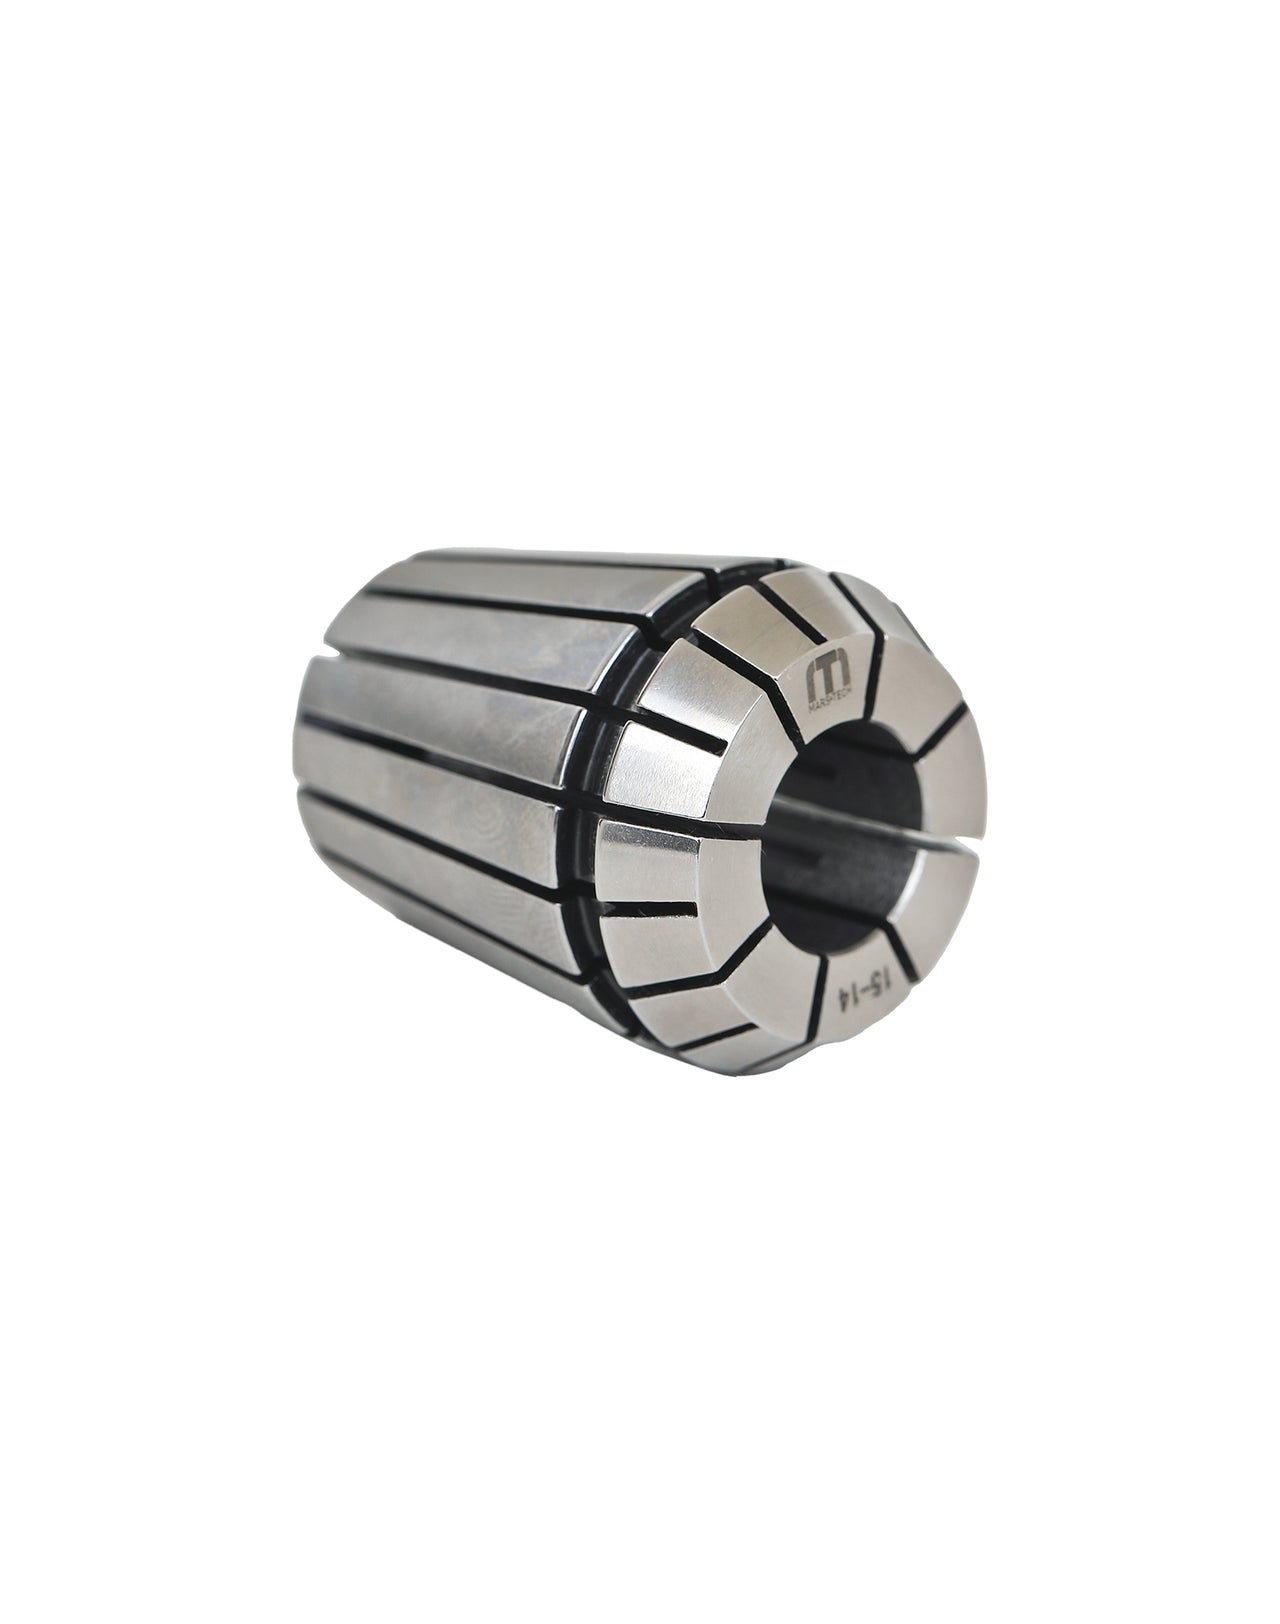 ER20 Collet Ultra high precision 0.005 AAA quality